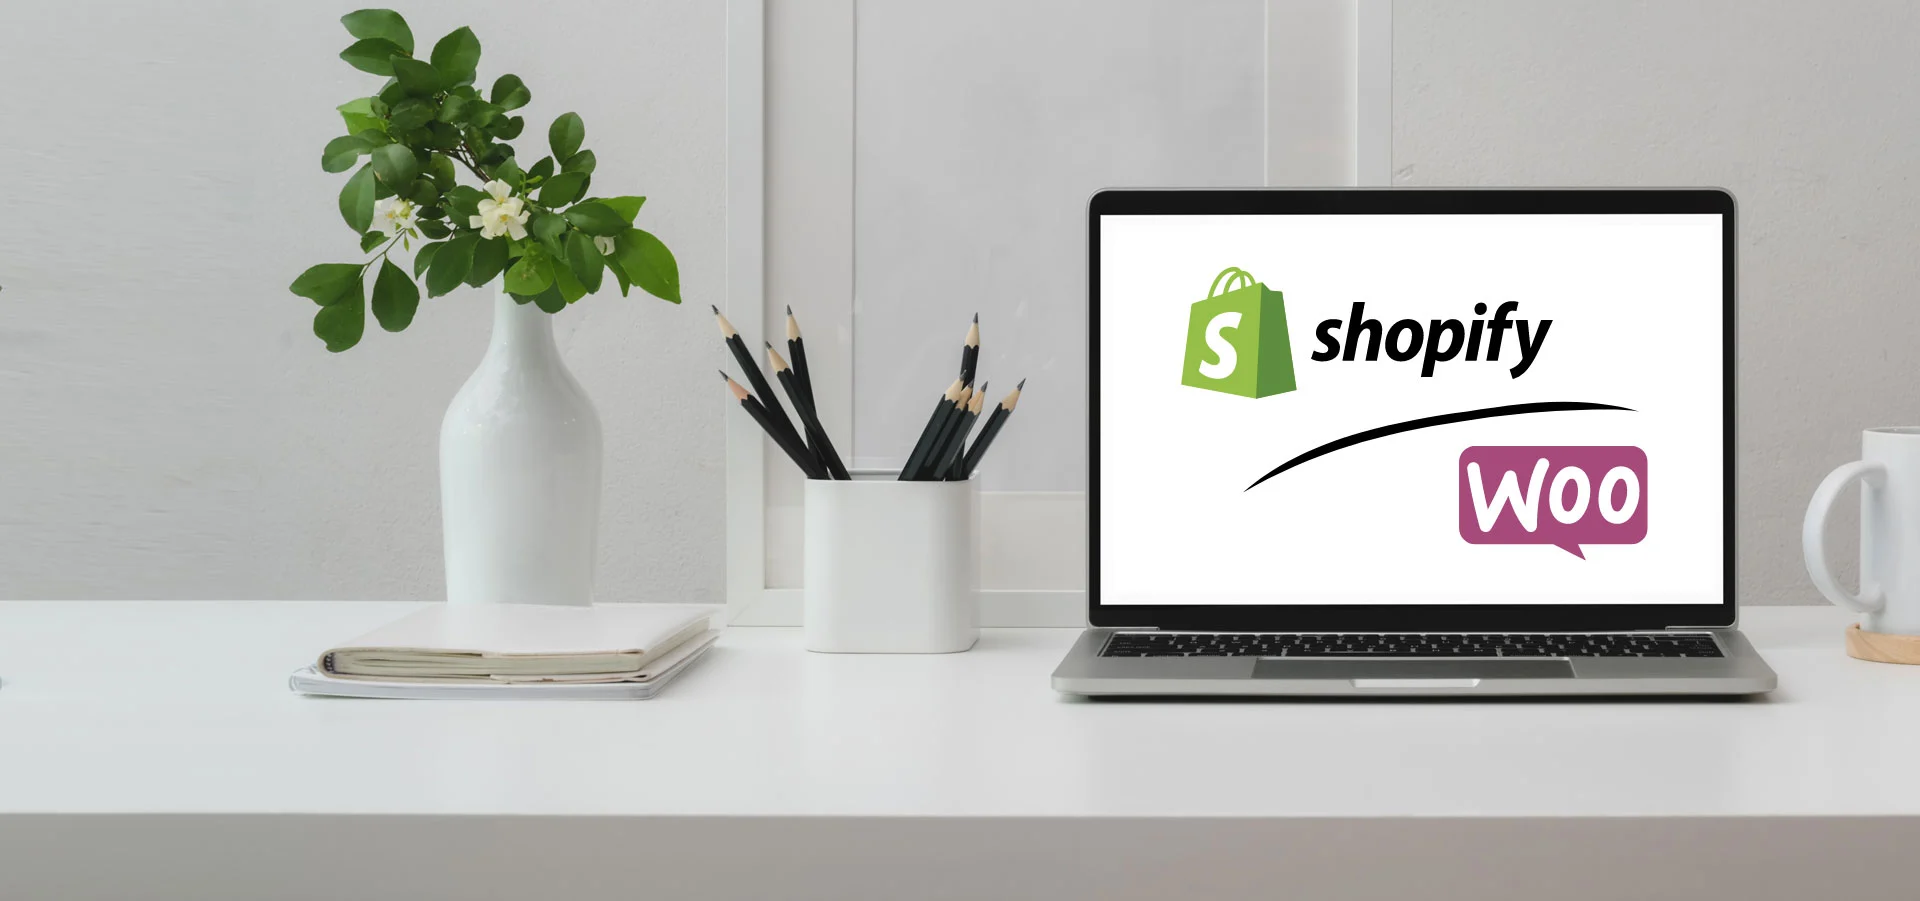 WooCommerce vs Shopify: Which Ecommerce Platform is Best?